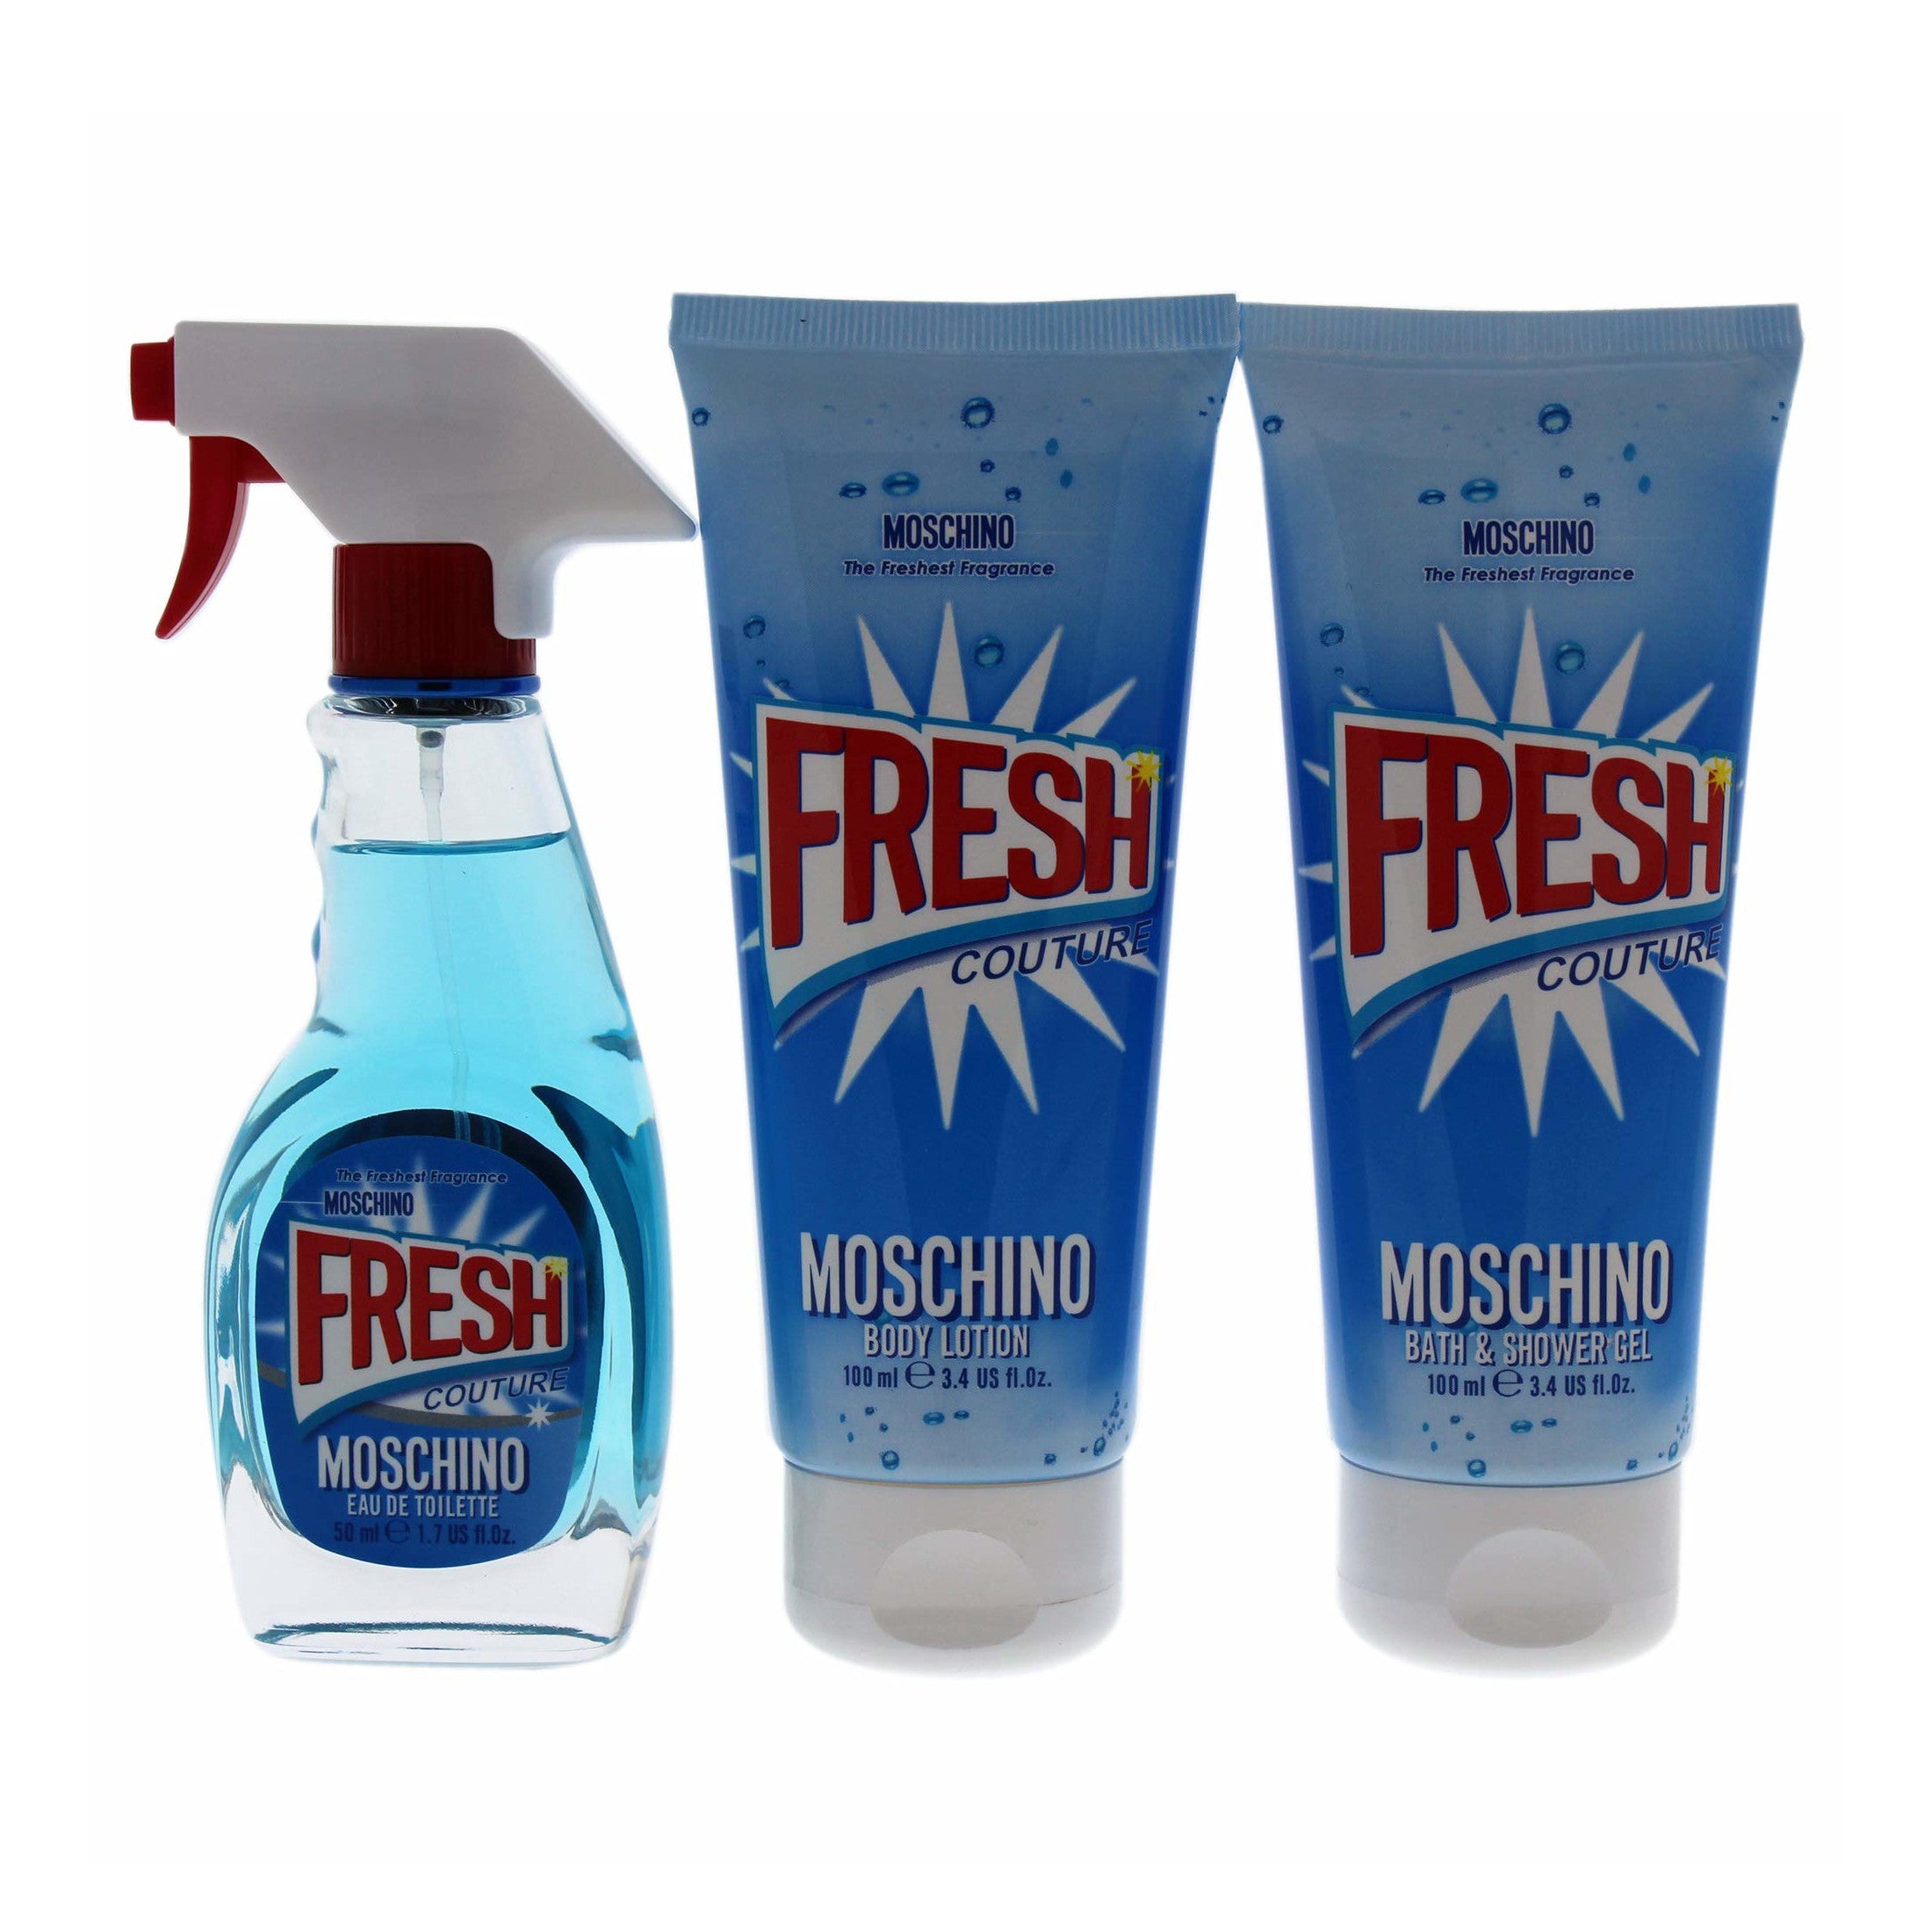 Moschino Mini Gift Set Gets You All the Window Cleaner Scented Fun You Can  Handle - Musings of a Muse | Mini fragrance, Fragrance set, Perfume gift